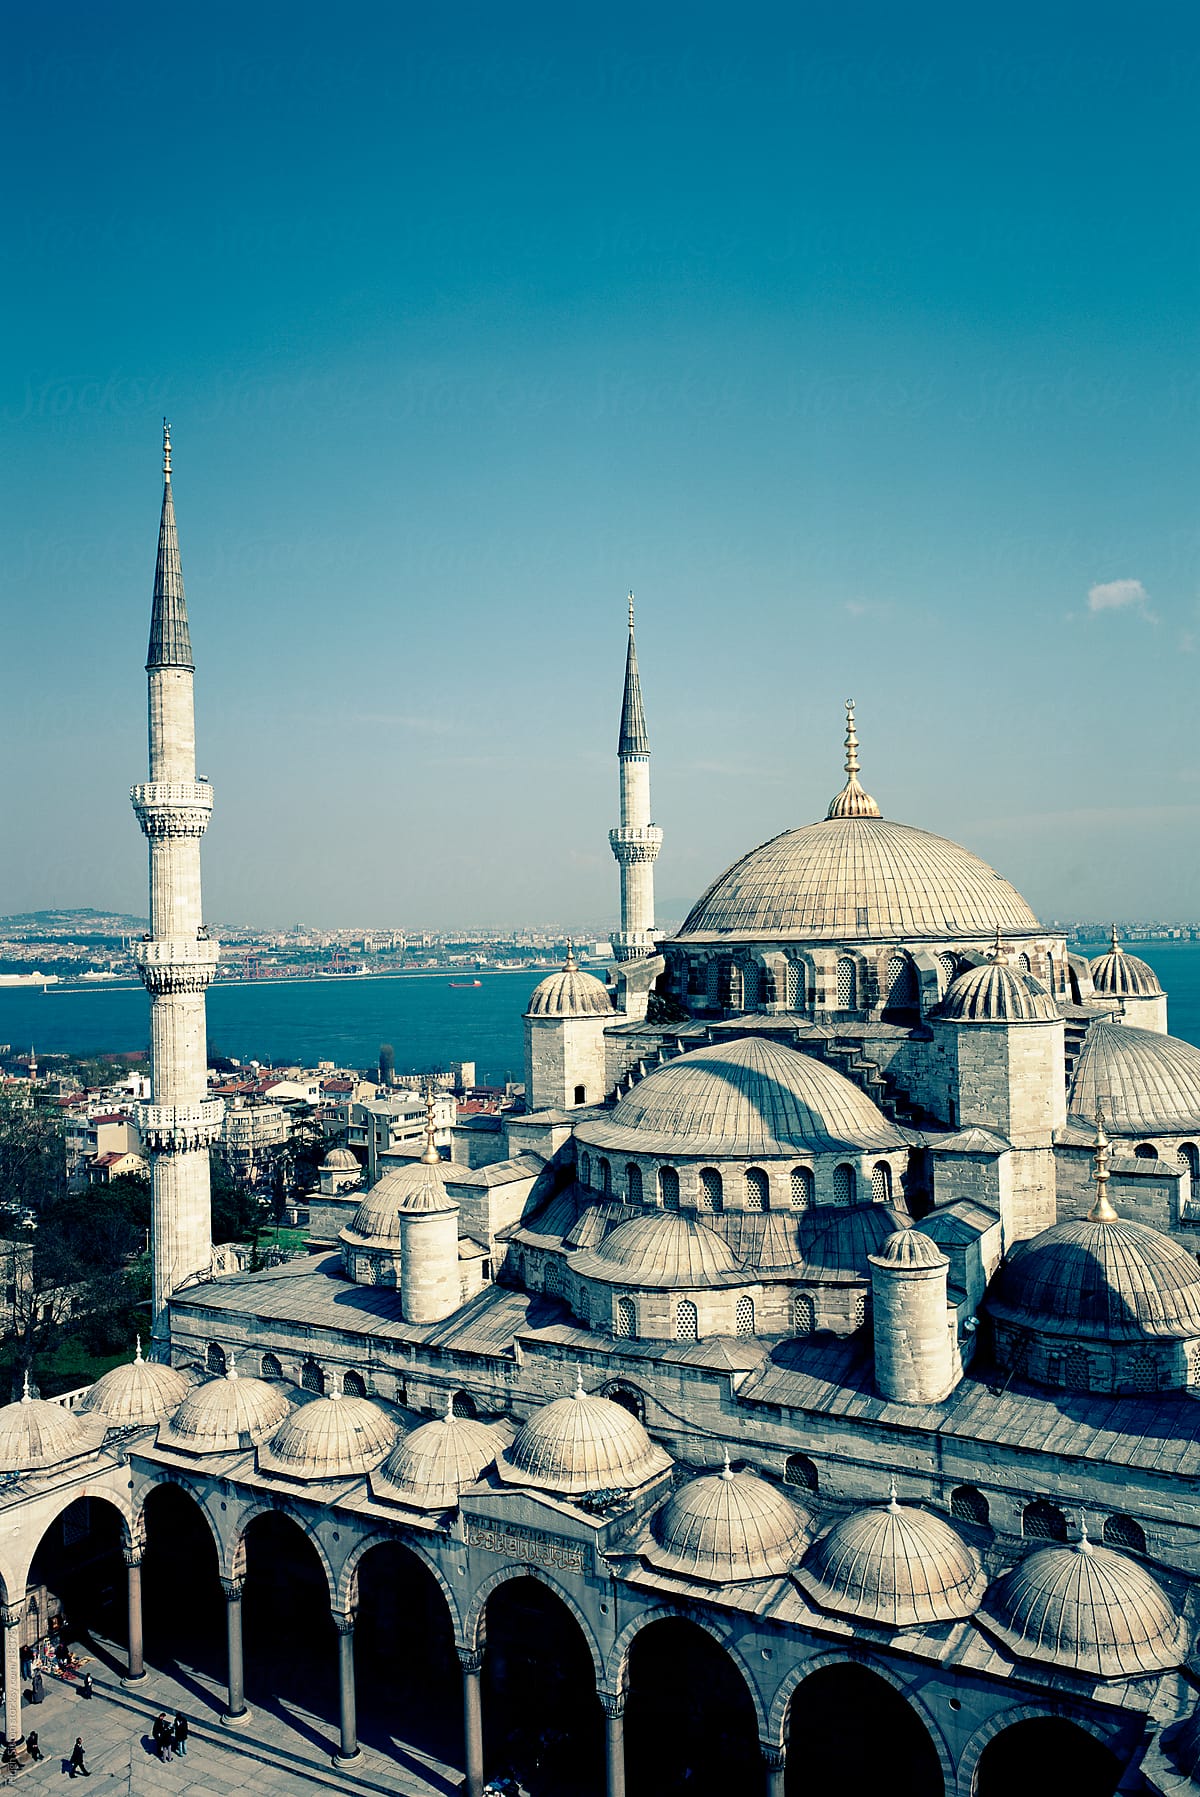 Blue Mosque. Istanbul with the Bosphorus in the background. Turkey.